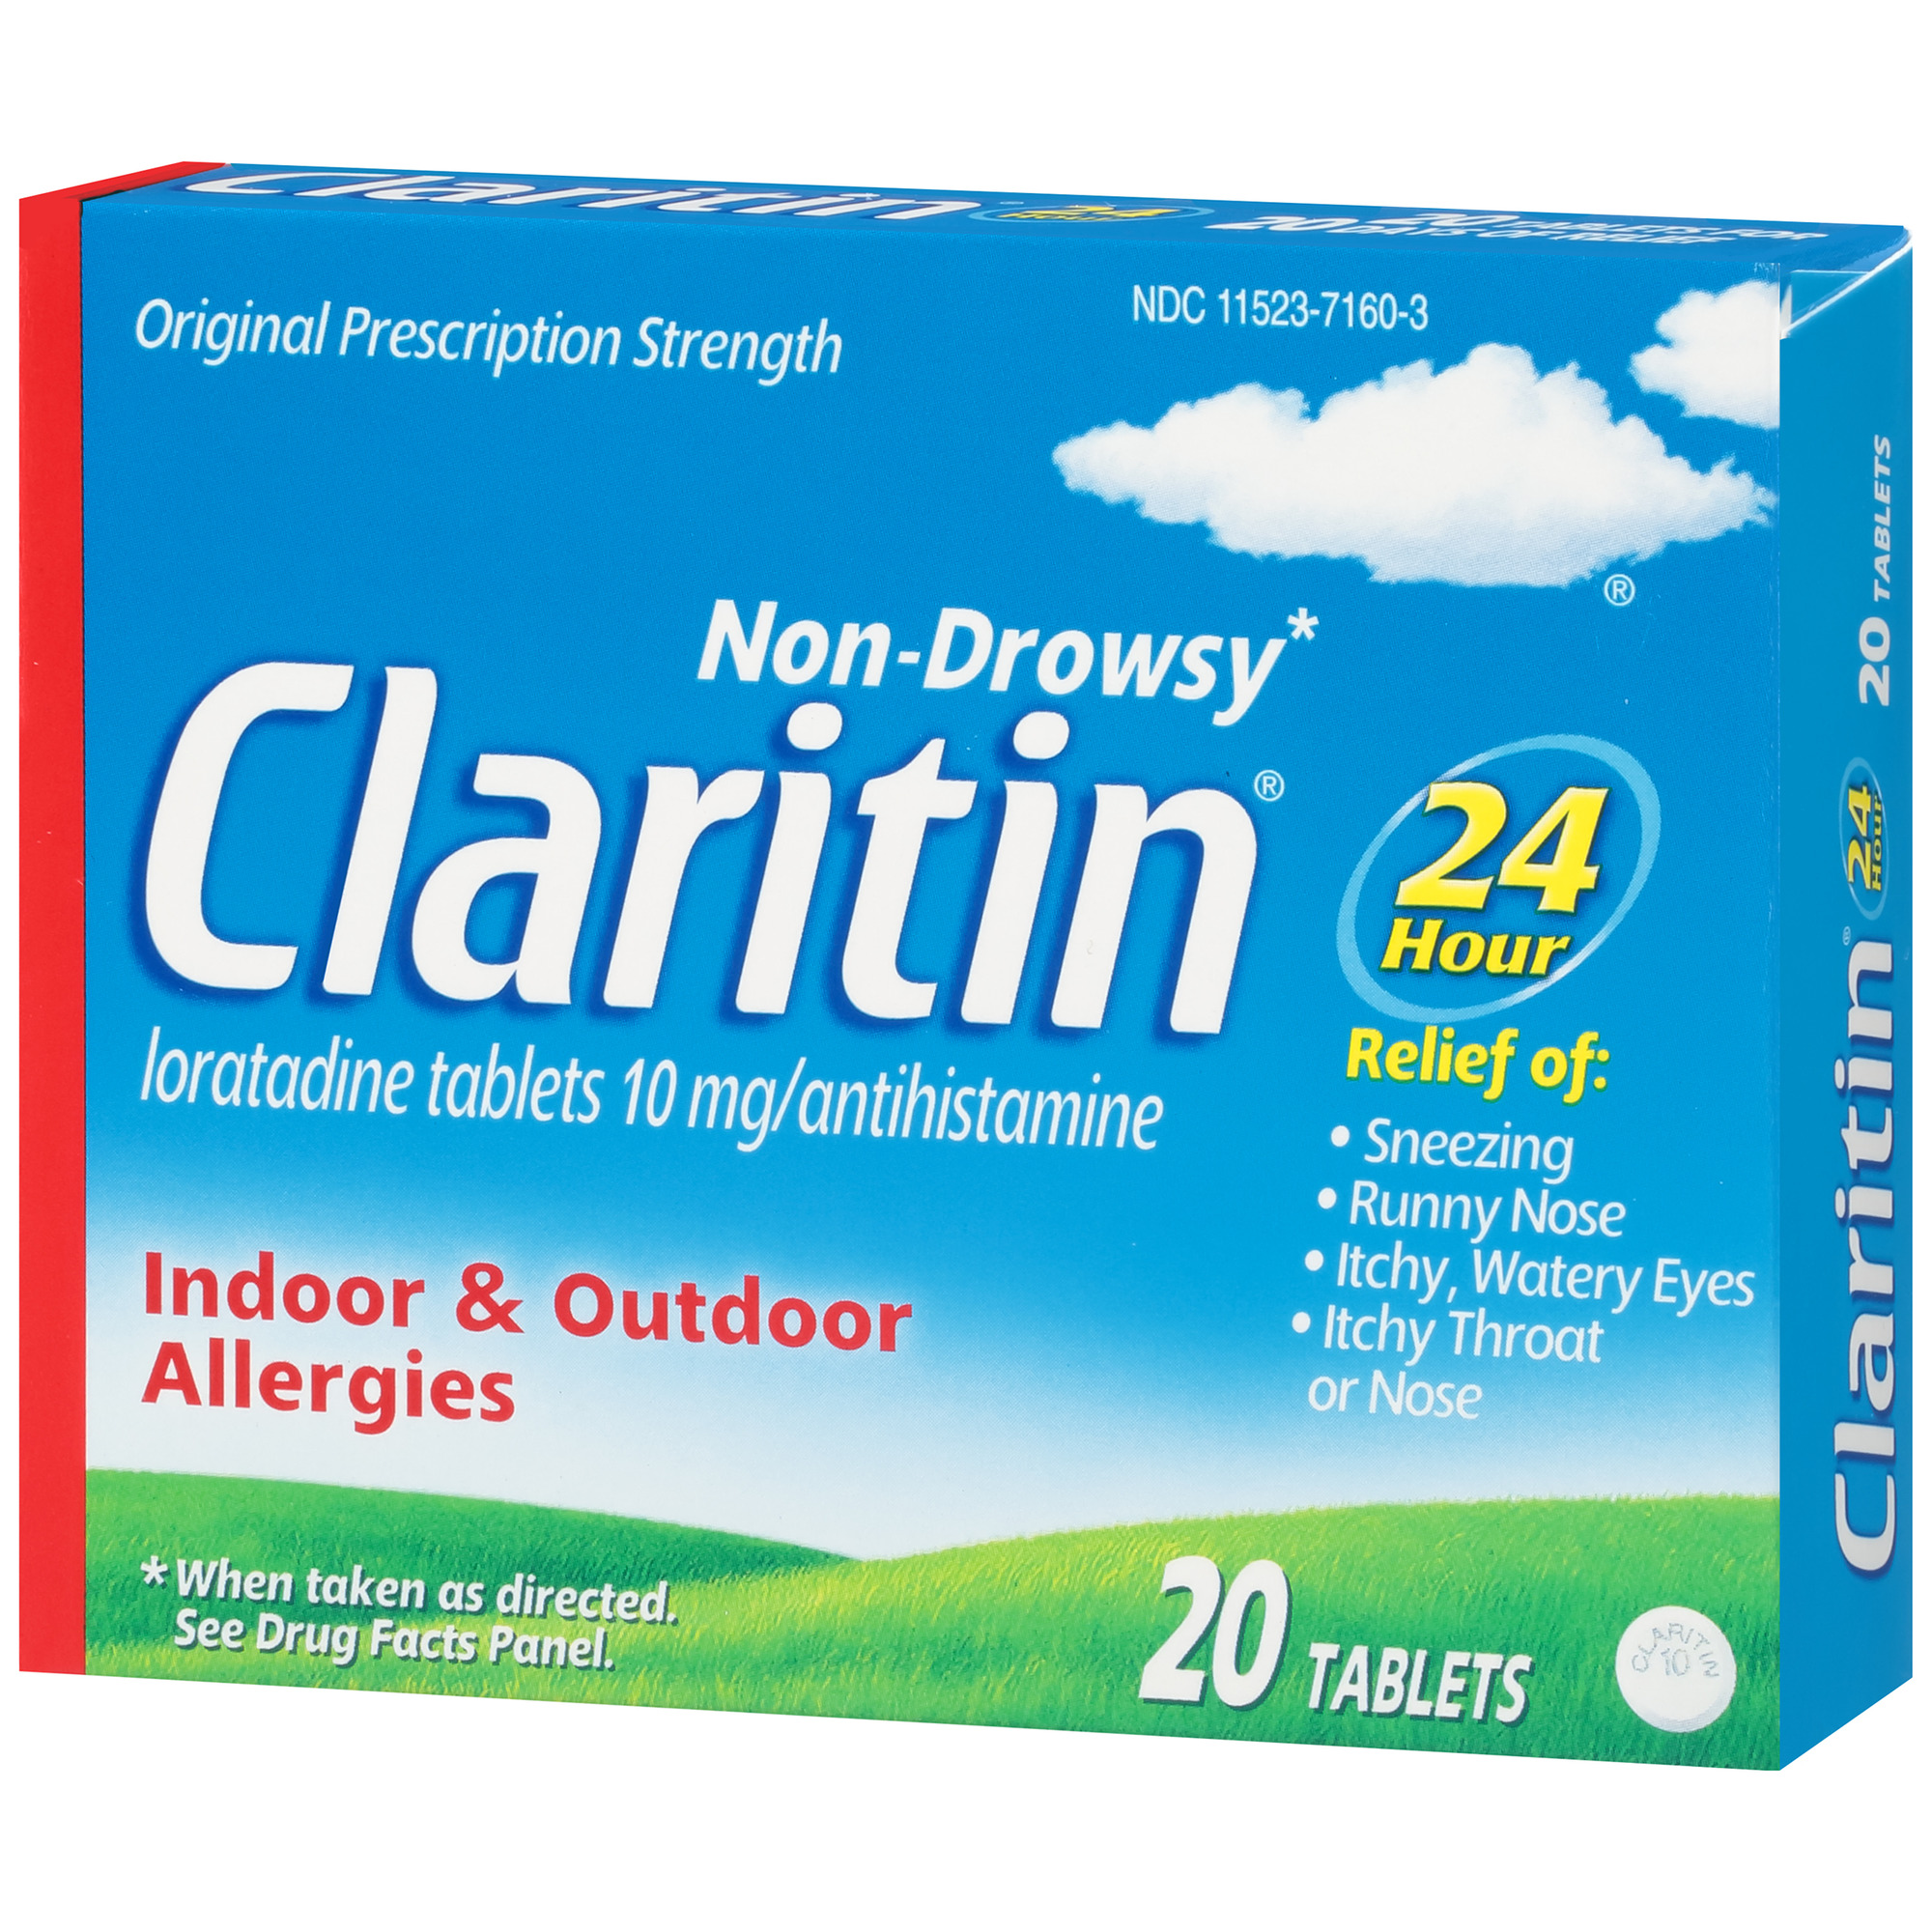 does claritin work for allergies